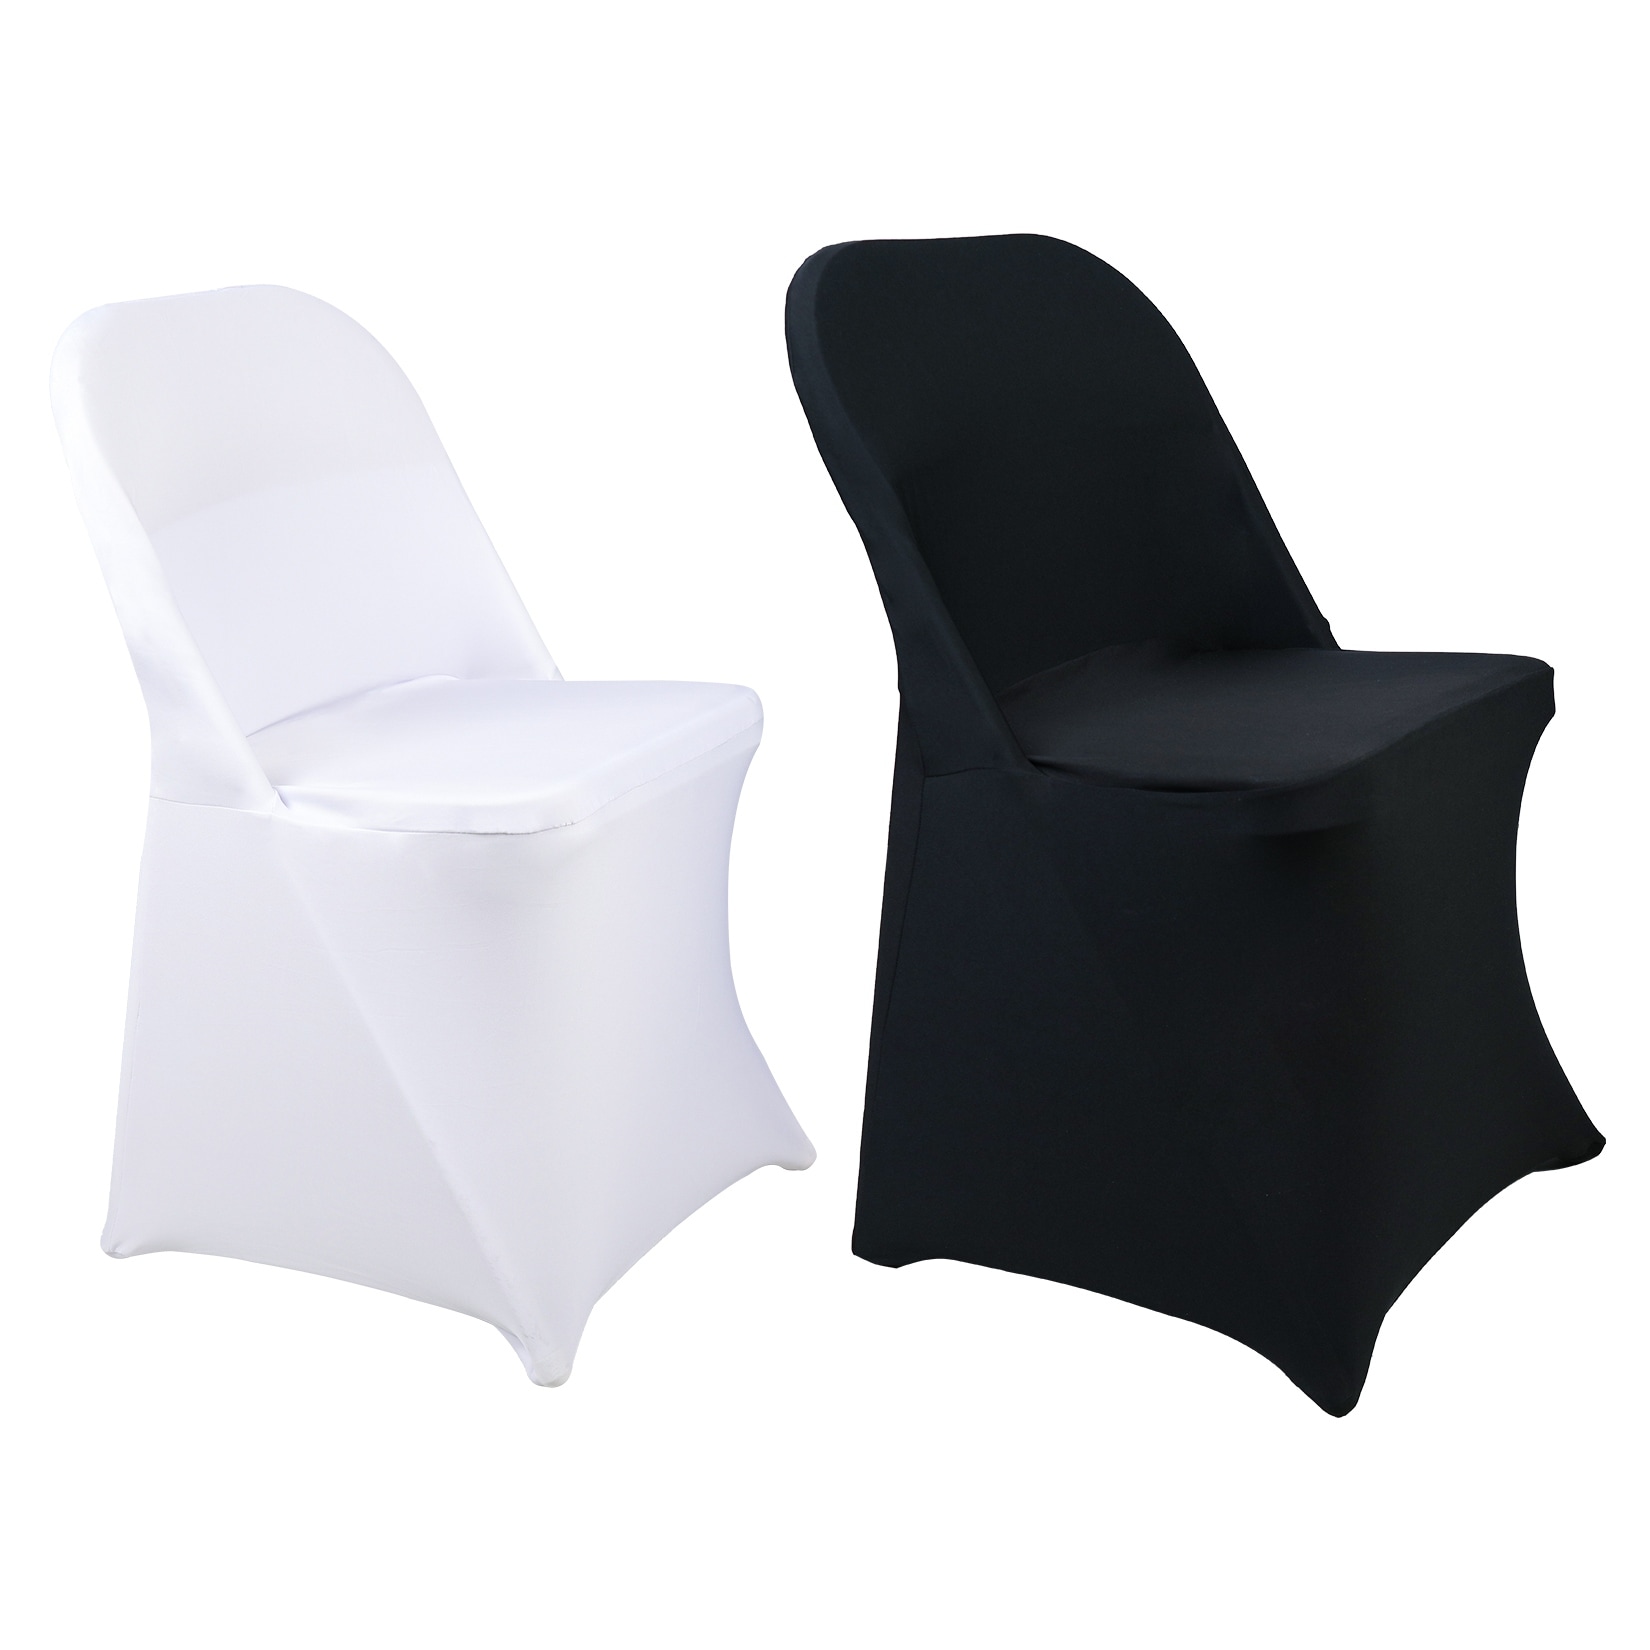 White Chair Slipcovers - Bed Bath & Beyond